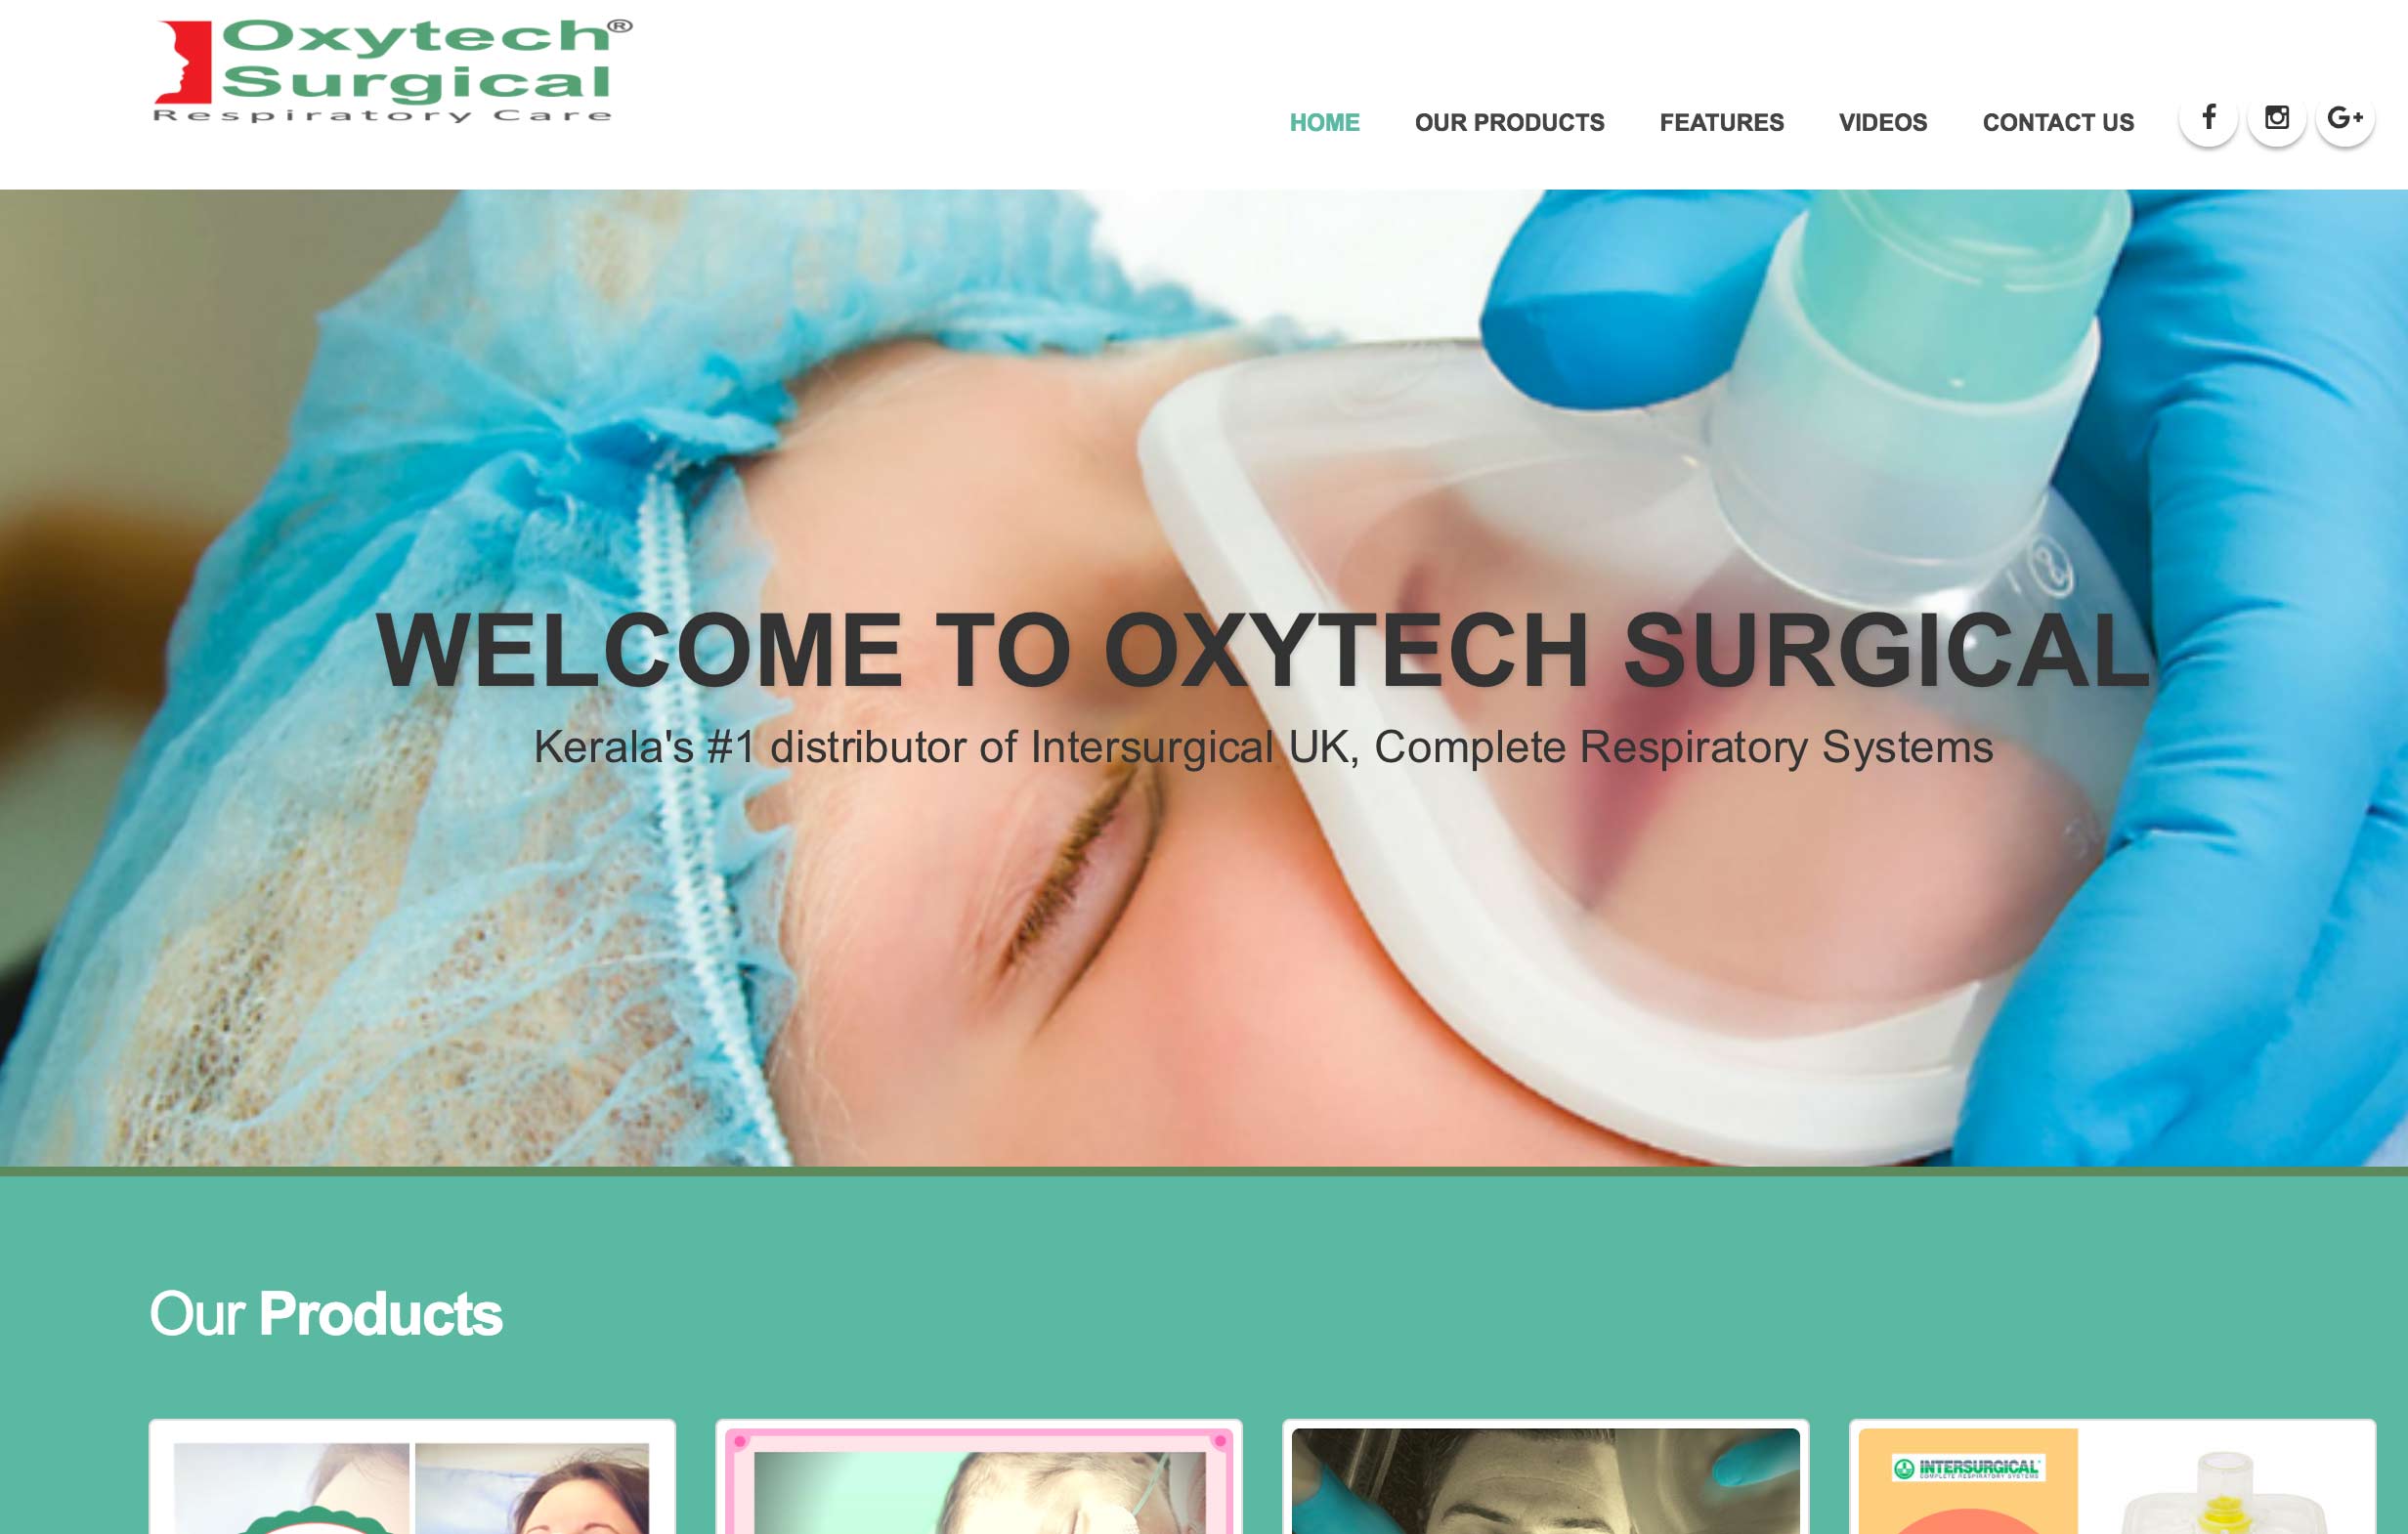 Website of Oxytech Surgical